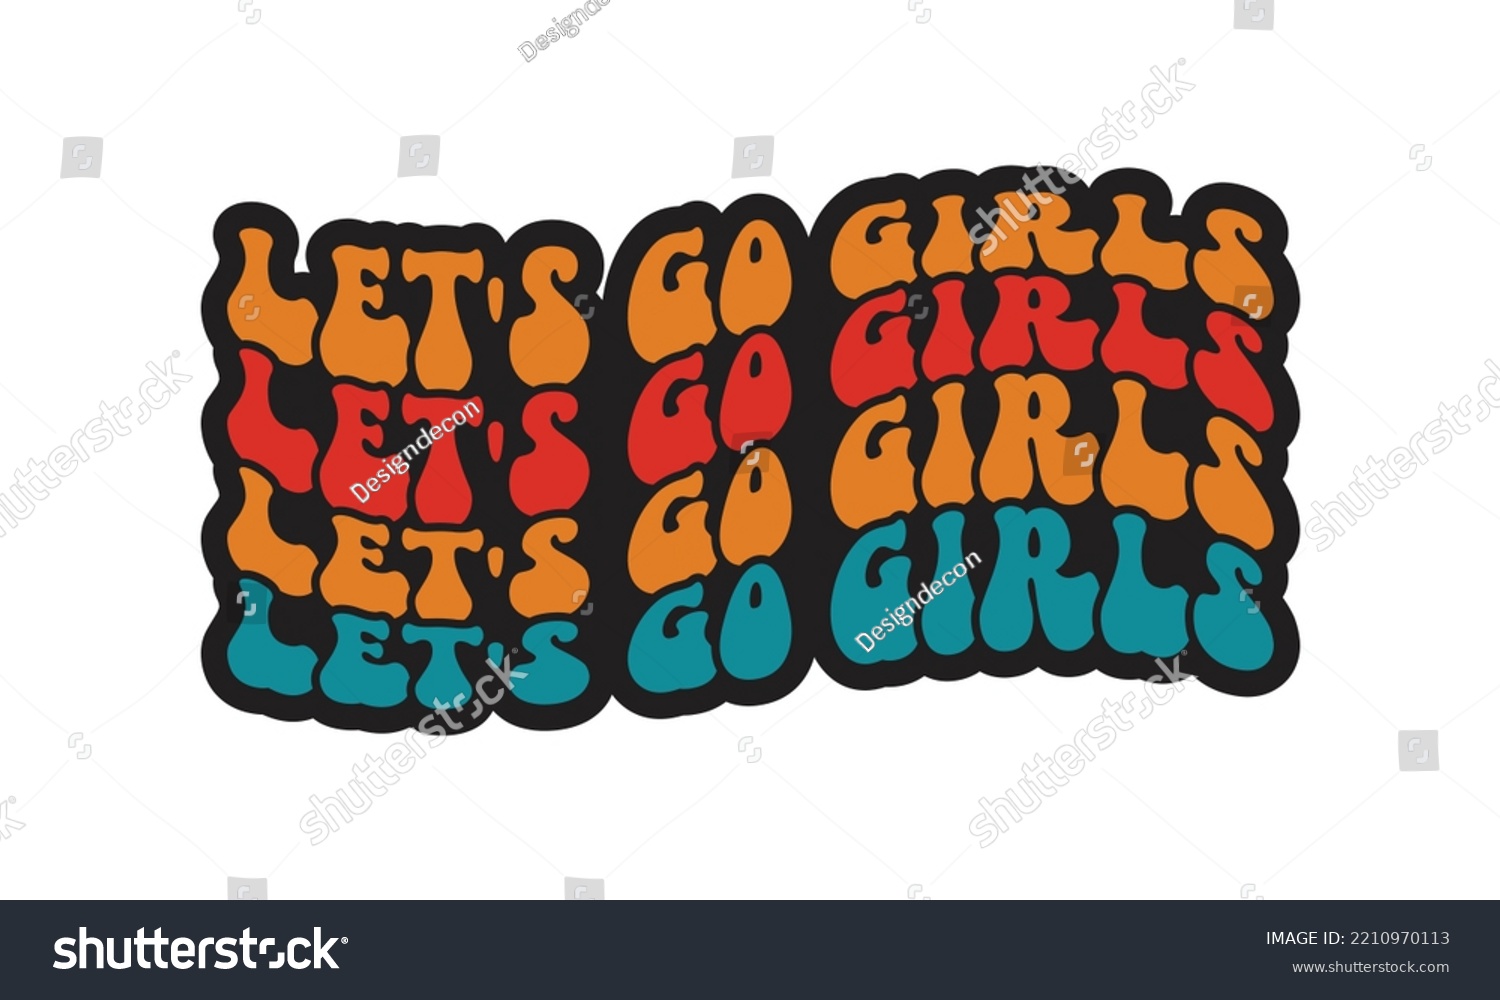 SVG of Let's Go Girls repeat text Wedding quote retro groovy typography sublimation SVG on white background svg